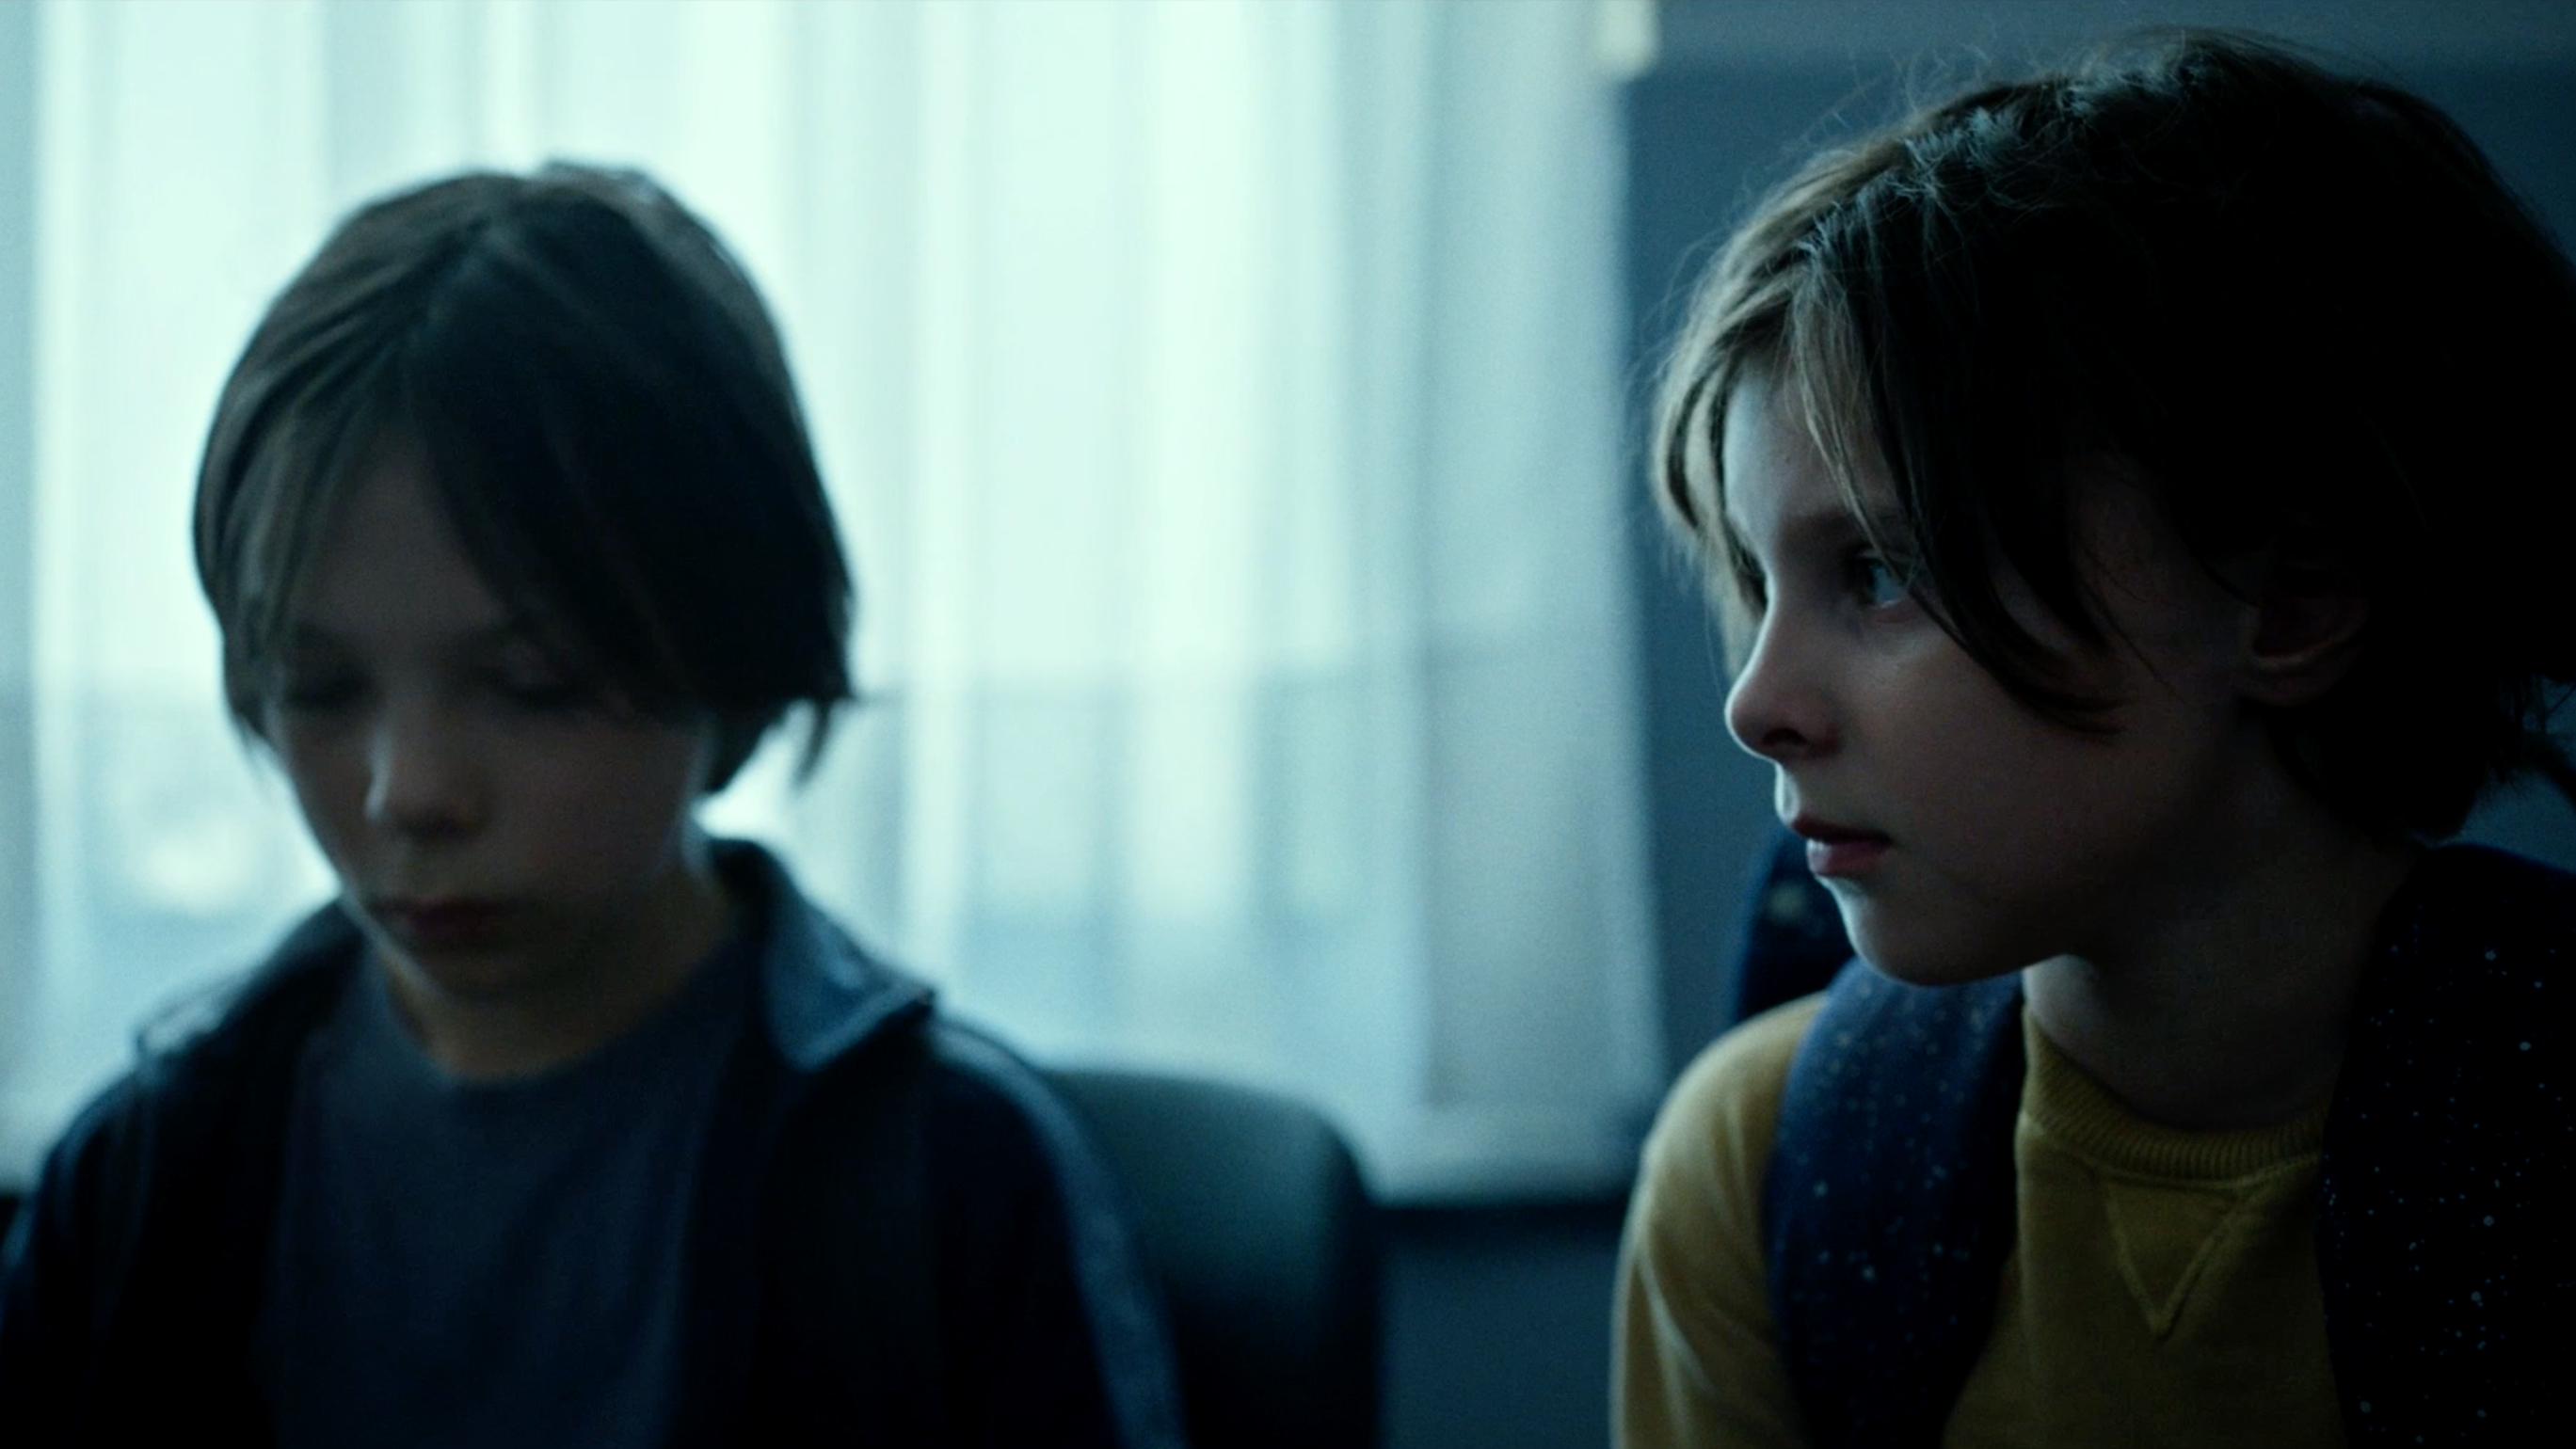 The Playground is a battlefield in this harrowing drama about grade-school bullying